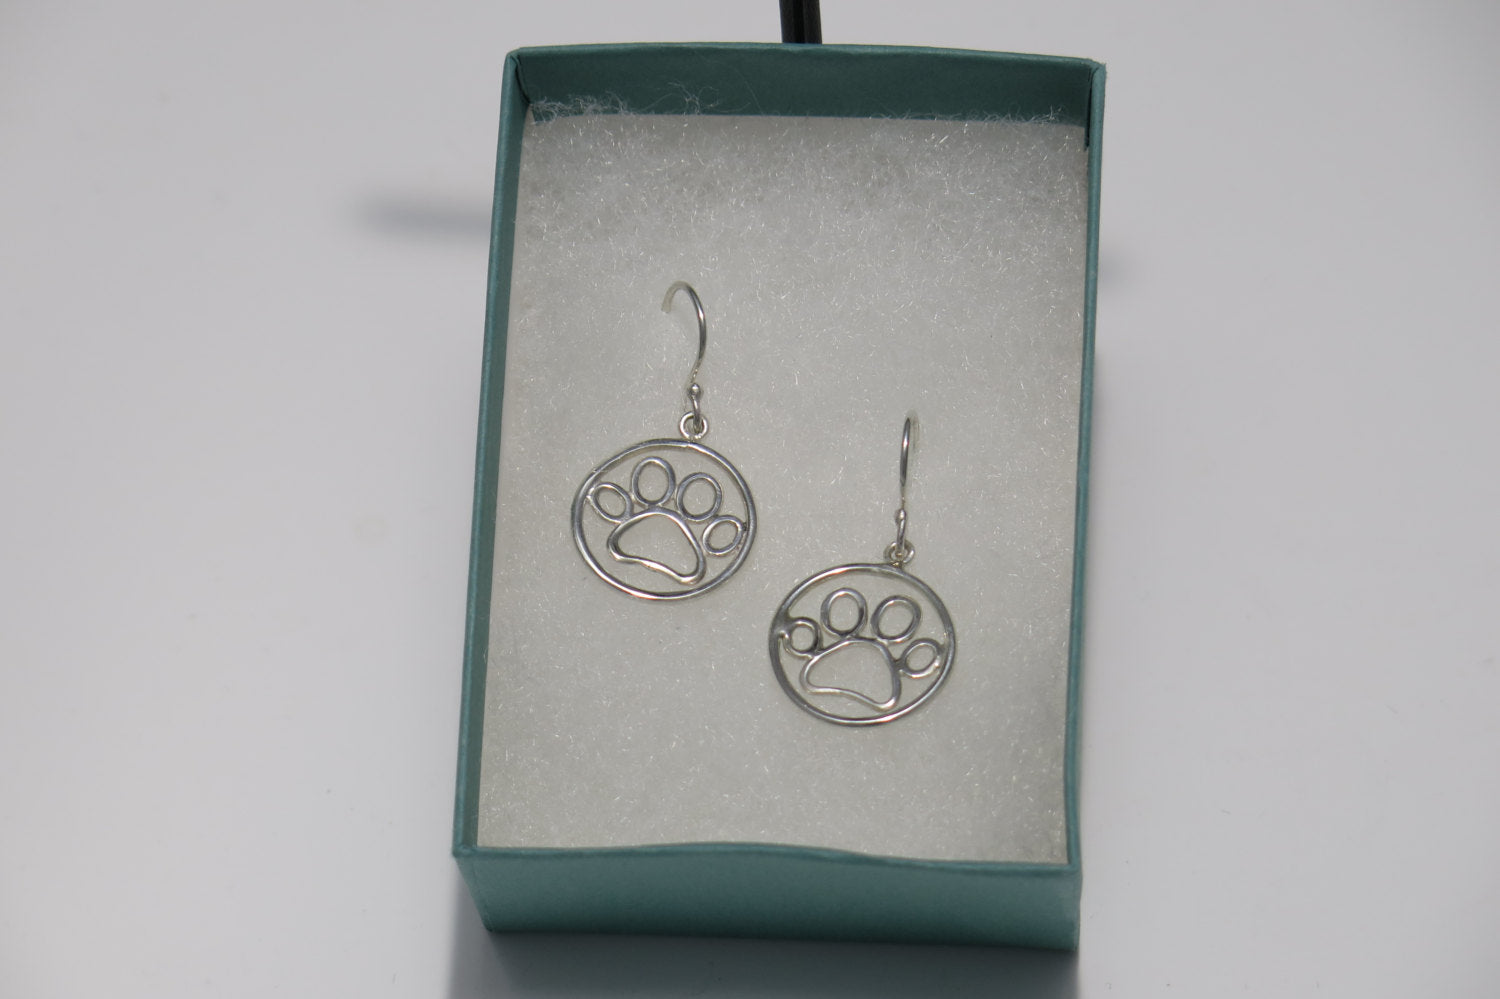 Dog or cat paw sterling silver earrings for animal lover birthday holiday gift handcrafted sterling silver wire Free shipping and gift box